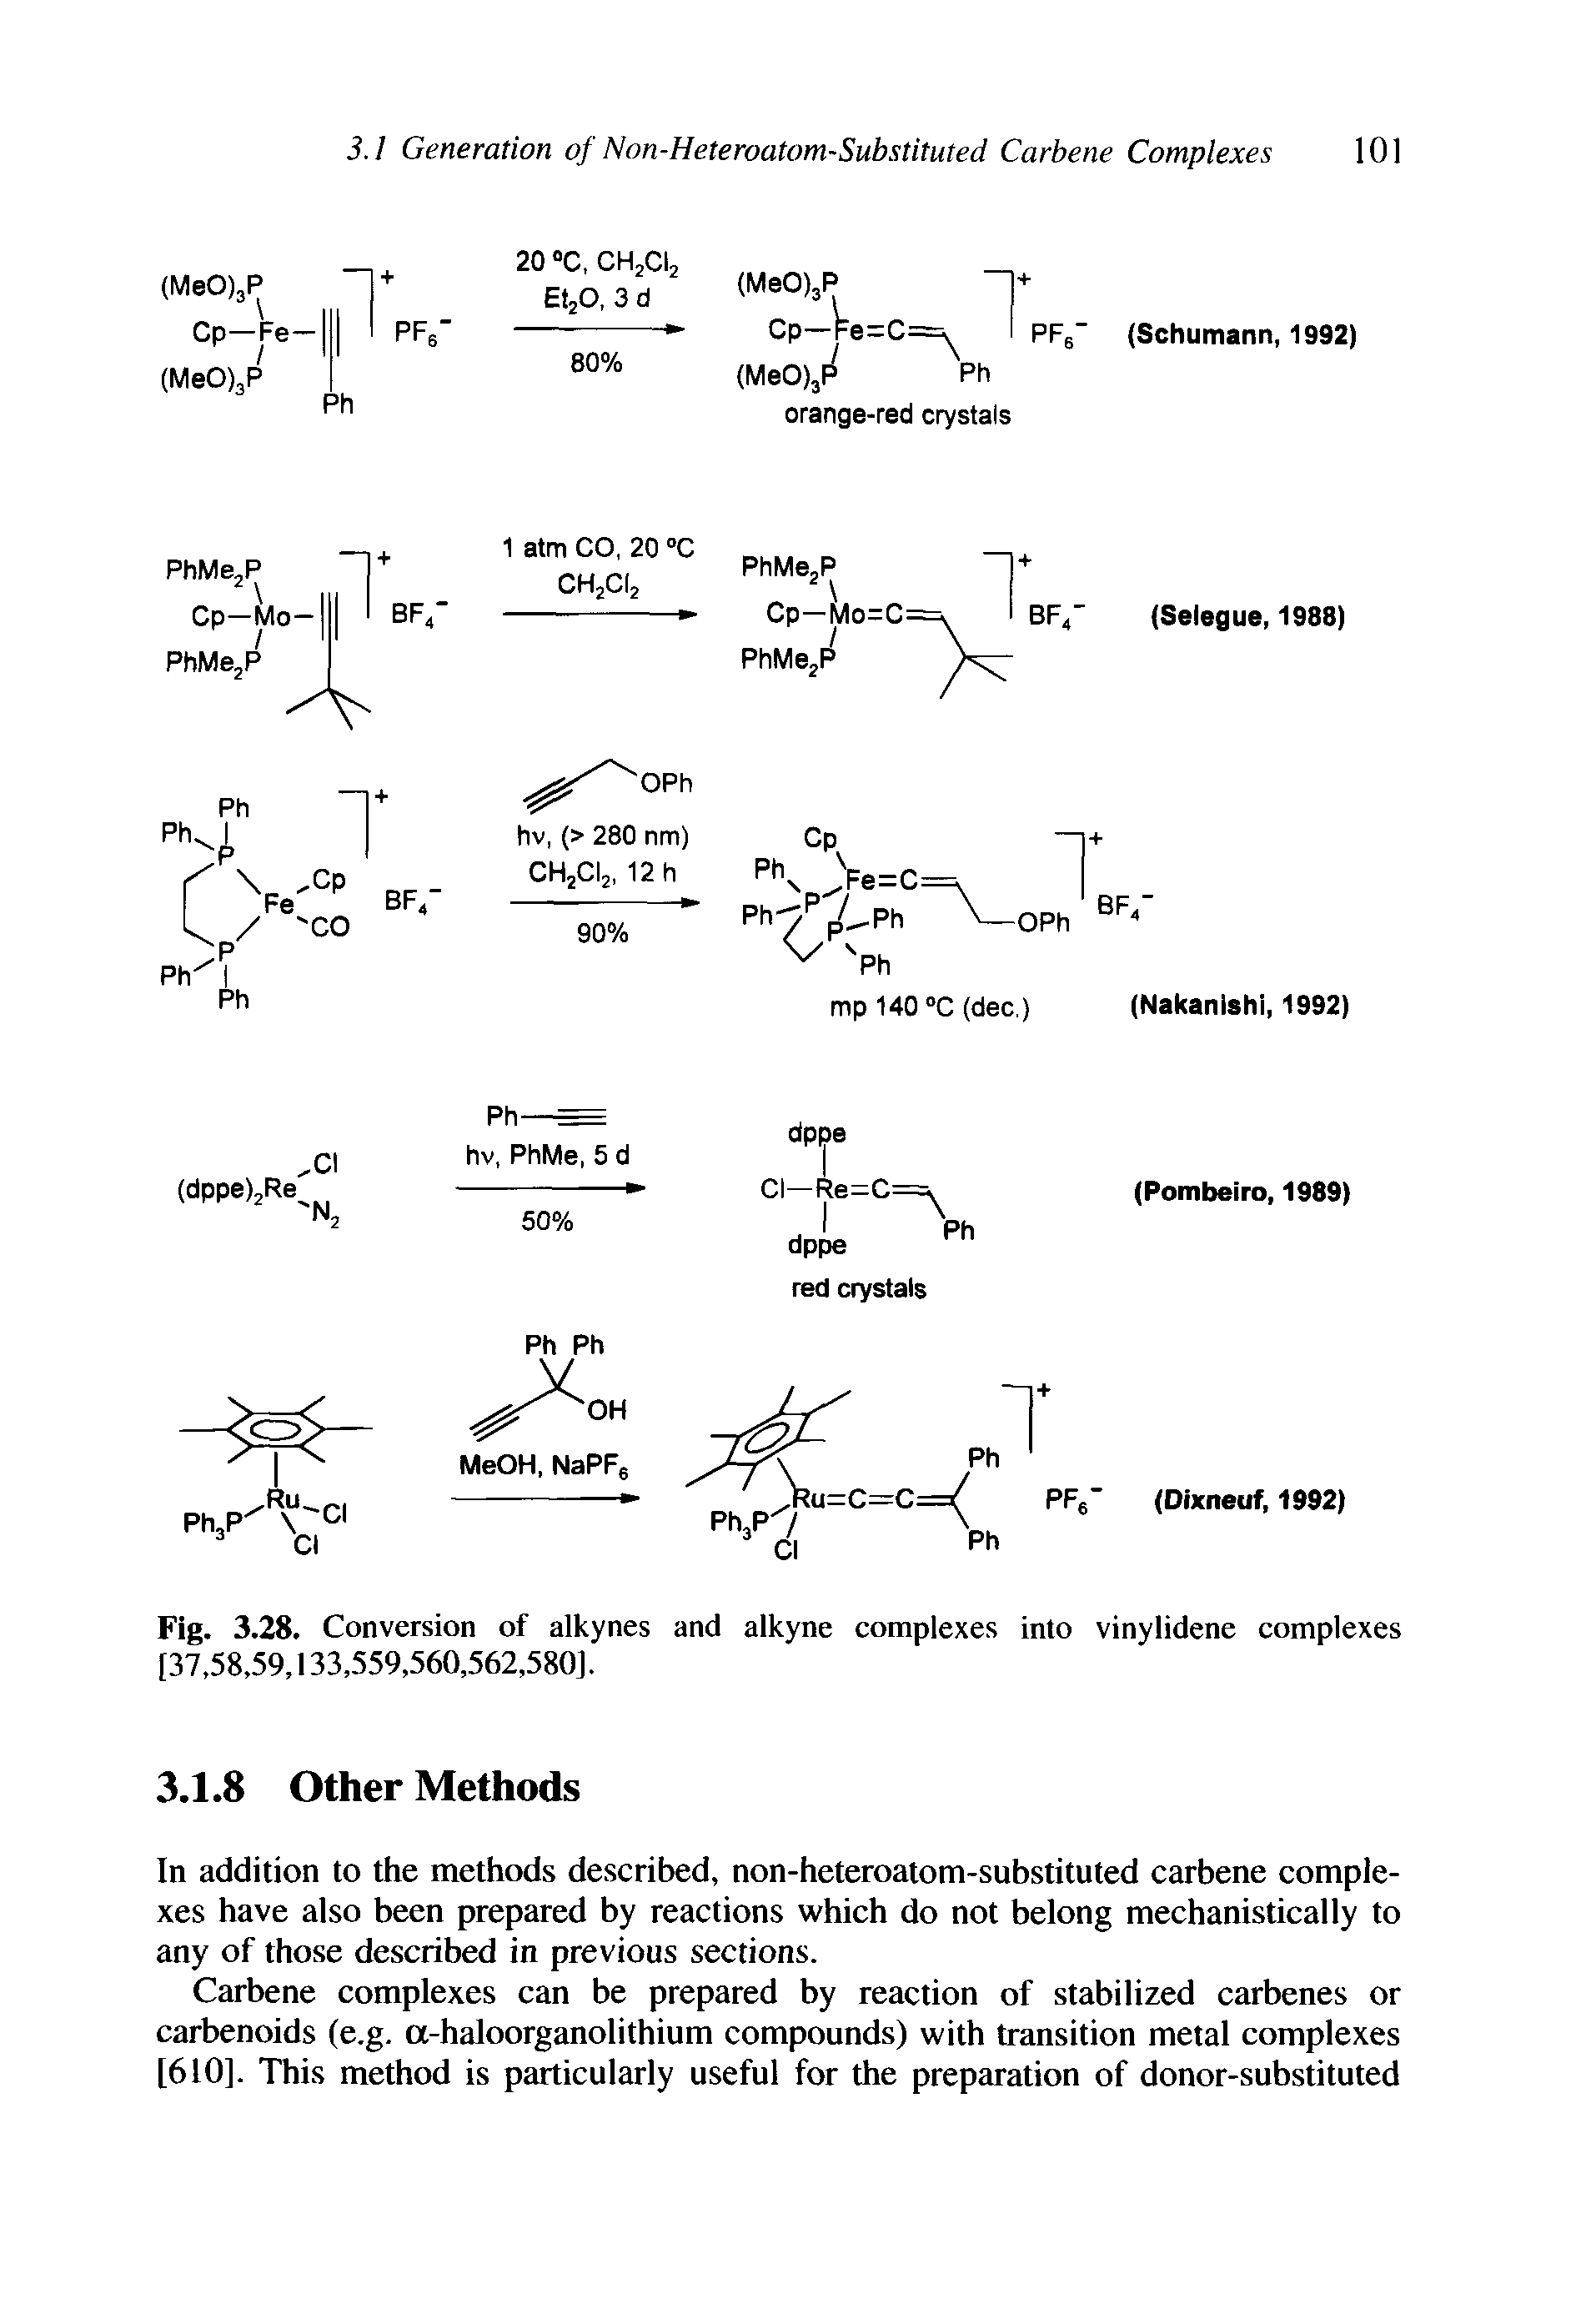 Fig. 3.28. Conversion of alkynes and alkyne complexes into vinylidene complexes [37,58,59,133,559,560,562,580].